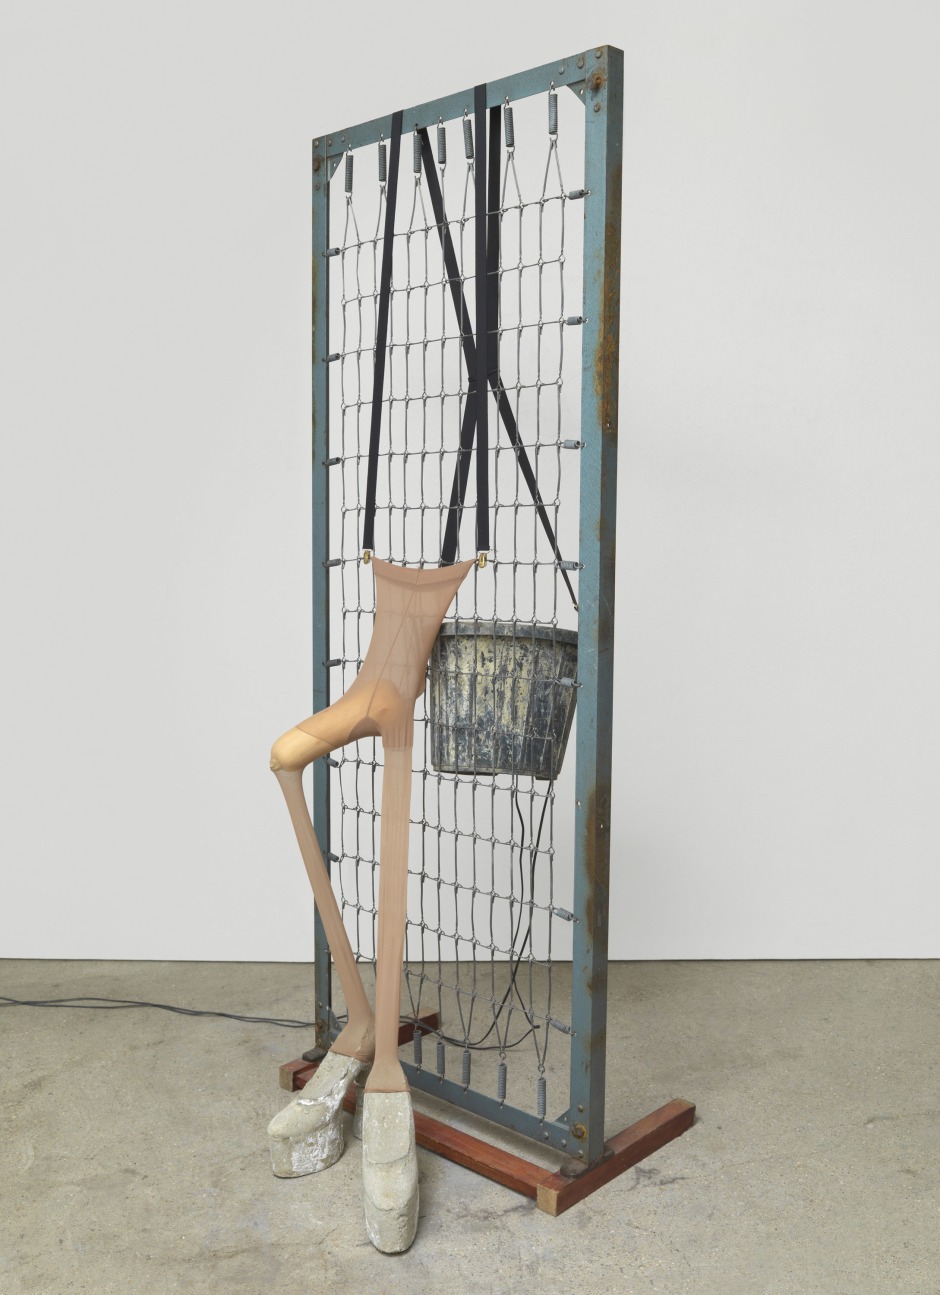 Man versus human nature-2012, 2005  plastic bucket, wood and steel bed base, braces, cement, nylon tights, butternut squash  194.3 x 76.2 x 45.7 cm  76 ½ x 30 x 18 in.